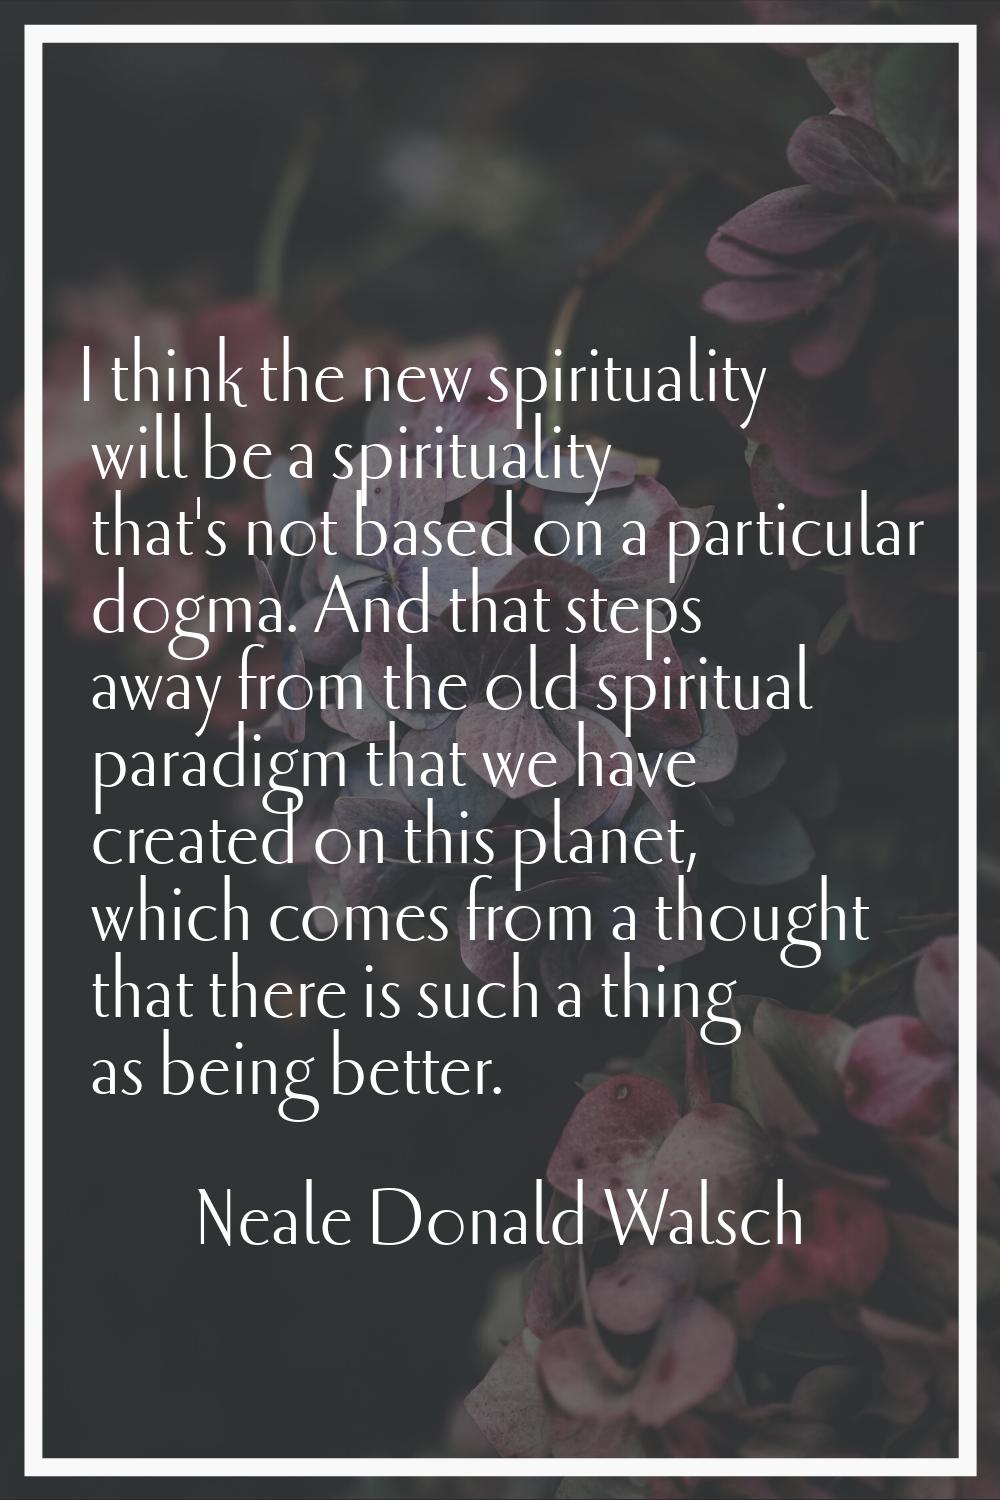 I think the new spirituality will be a spirituality that's not based on a particular dogma. And tha